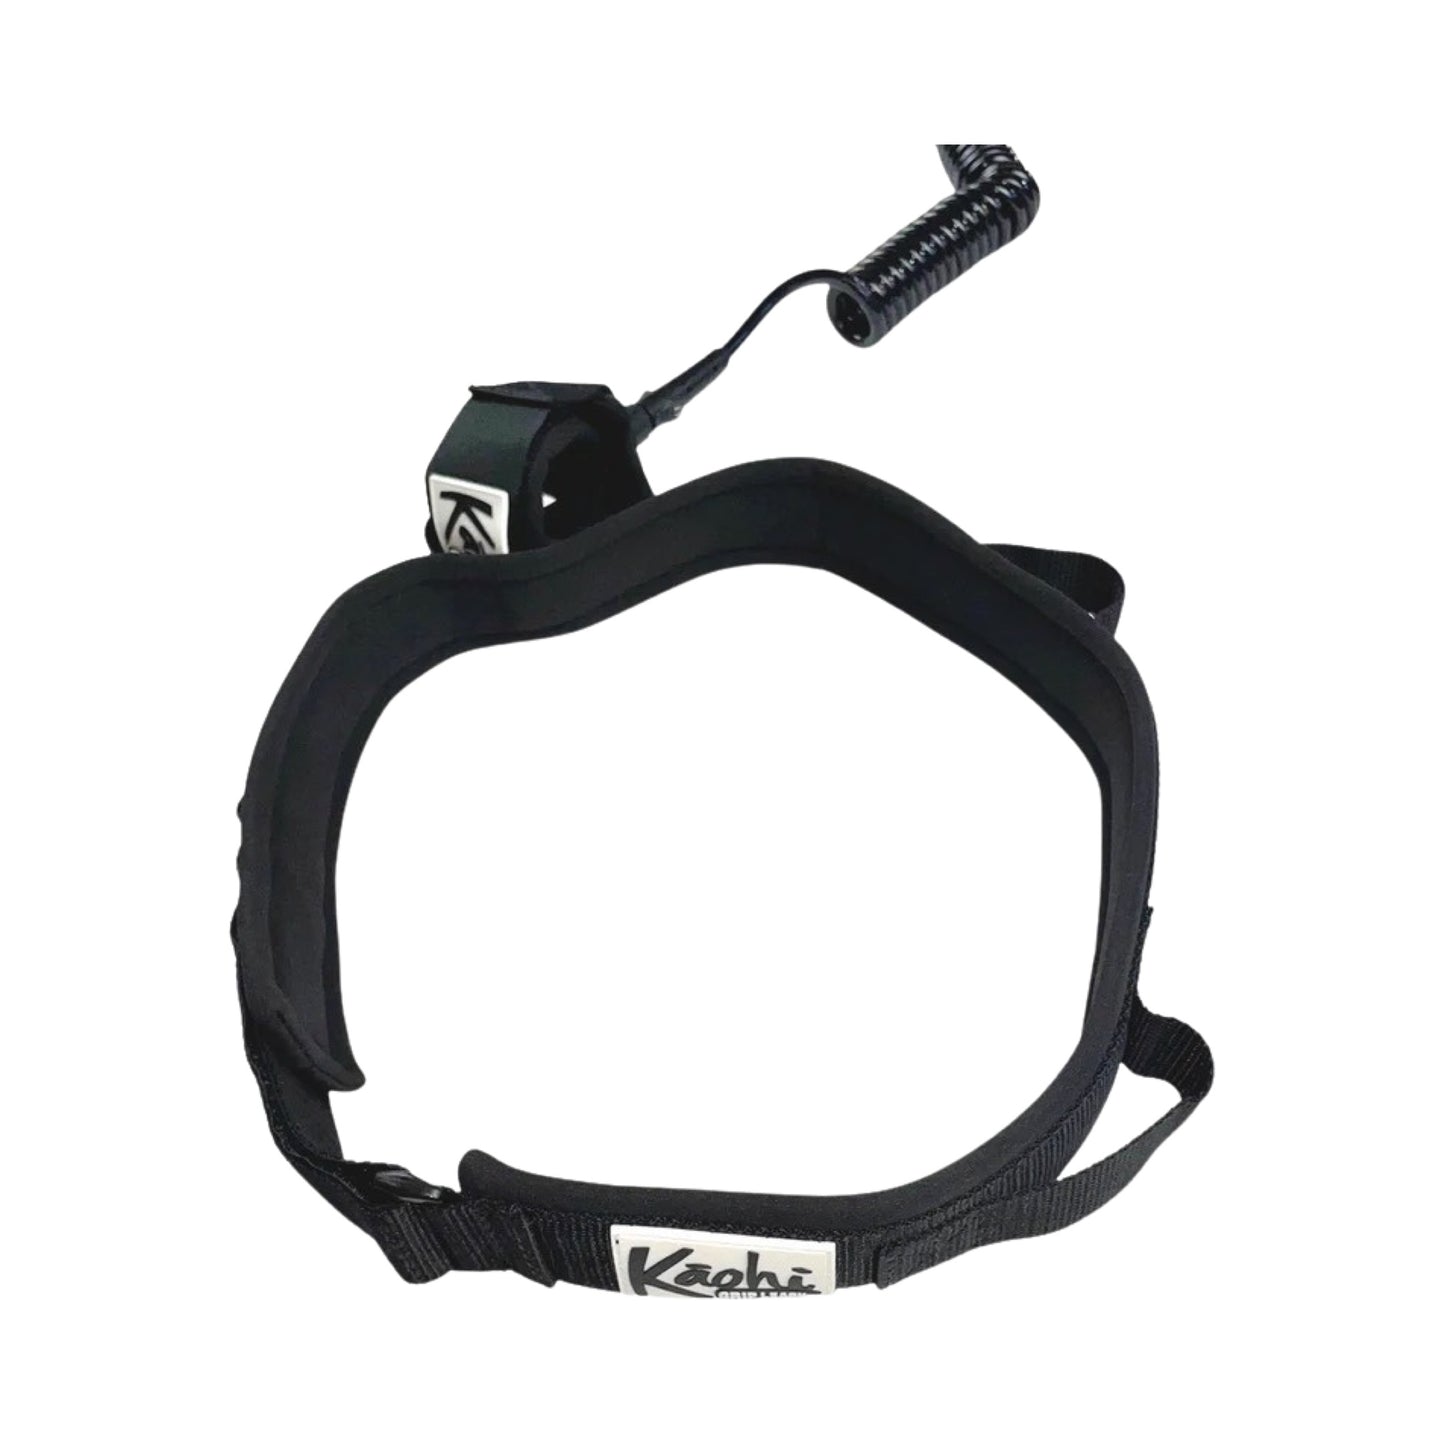 Kaohi Padded Belt -DISCONTINUED Replaced by COBRA FOIL Waist BELT